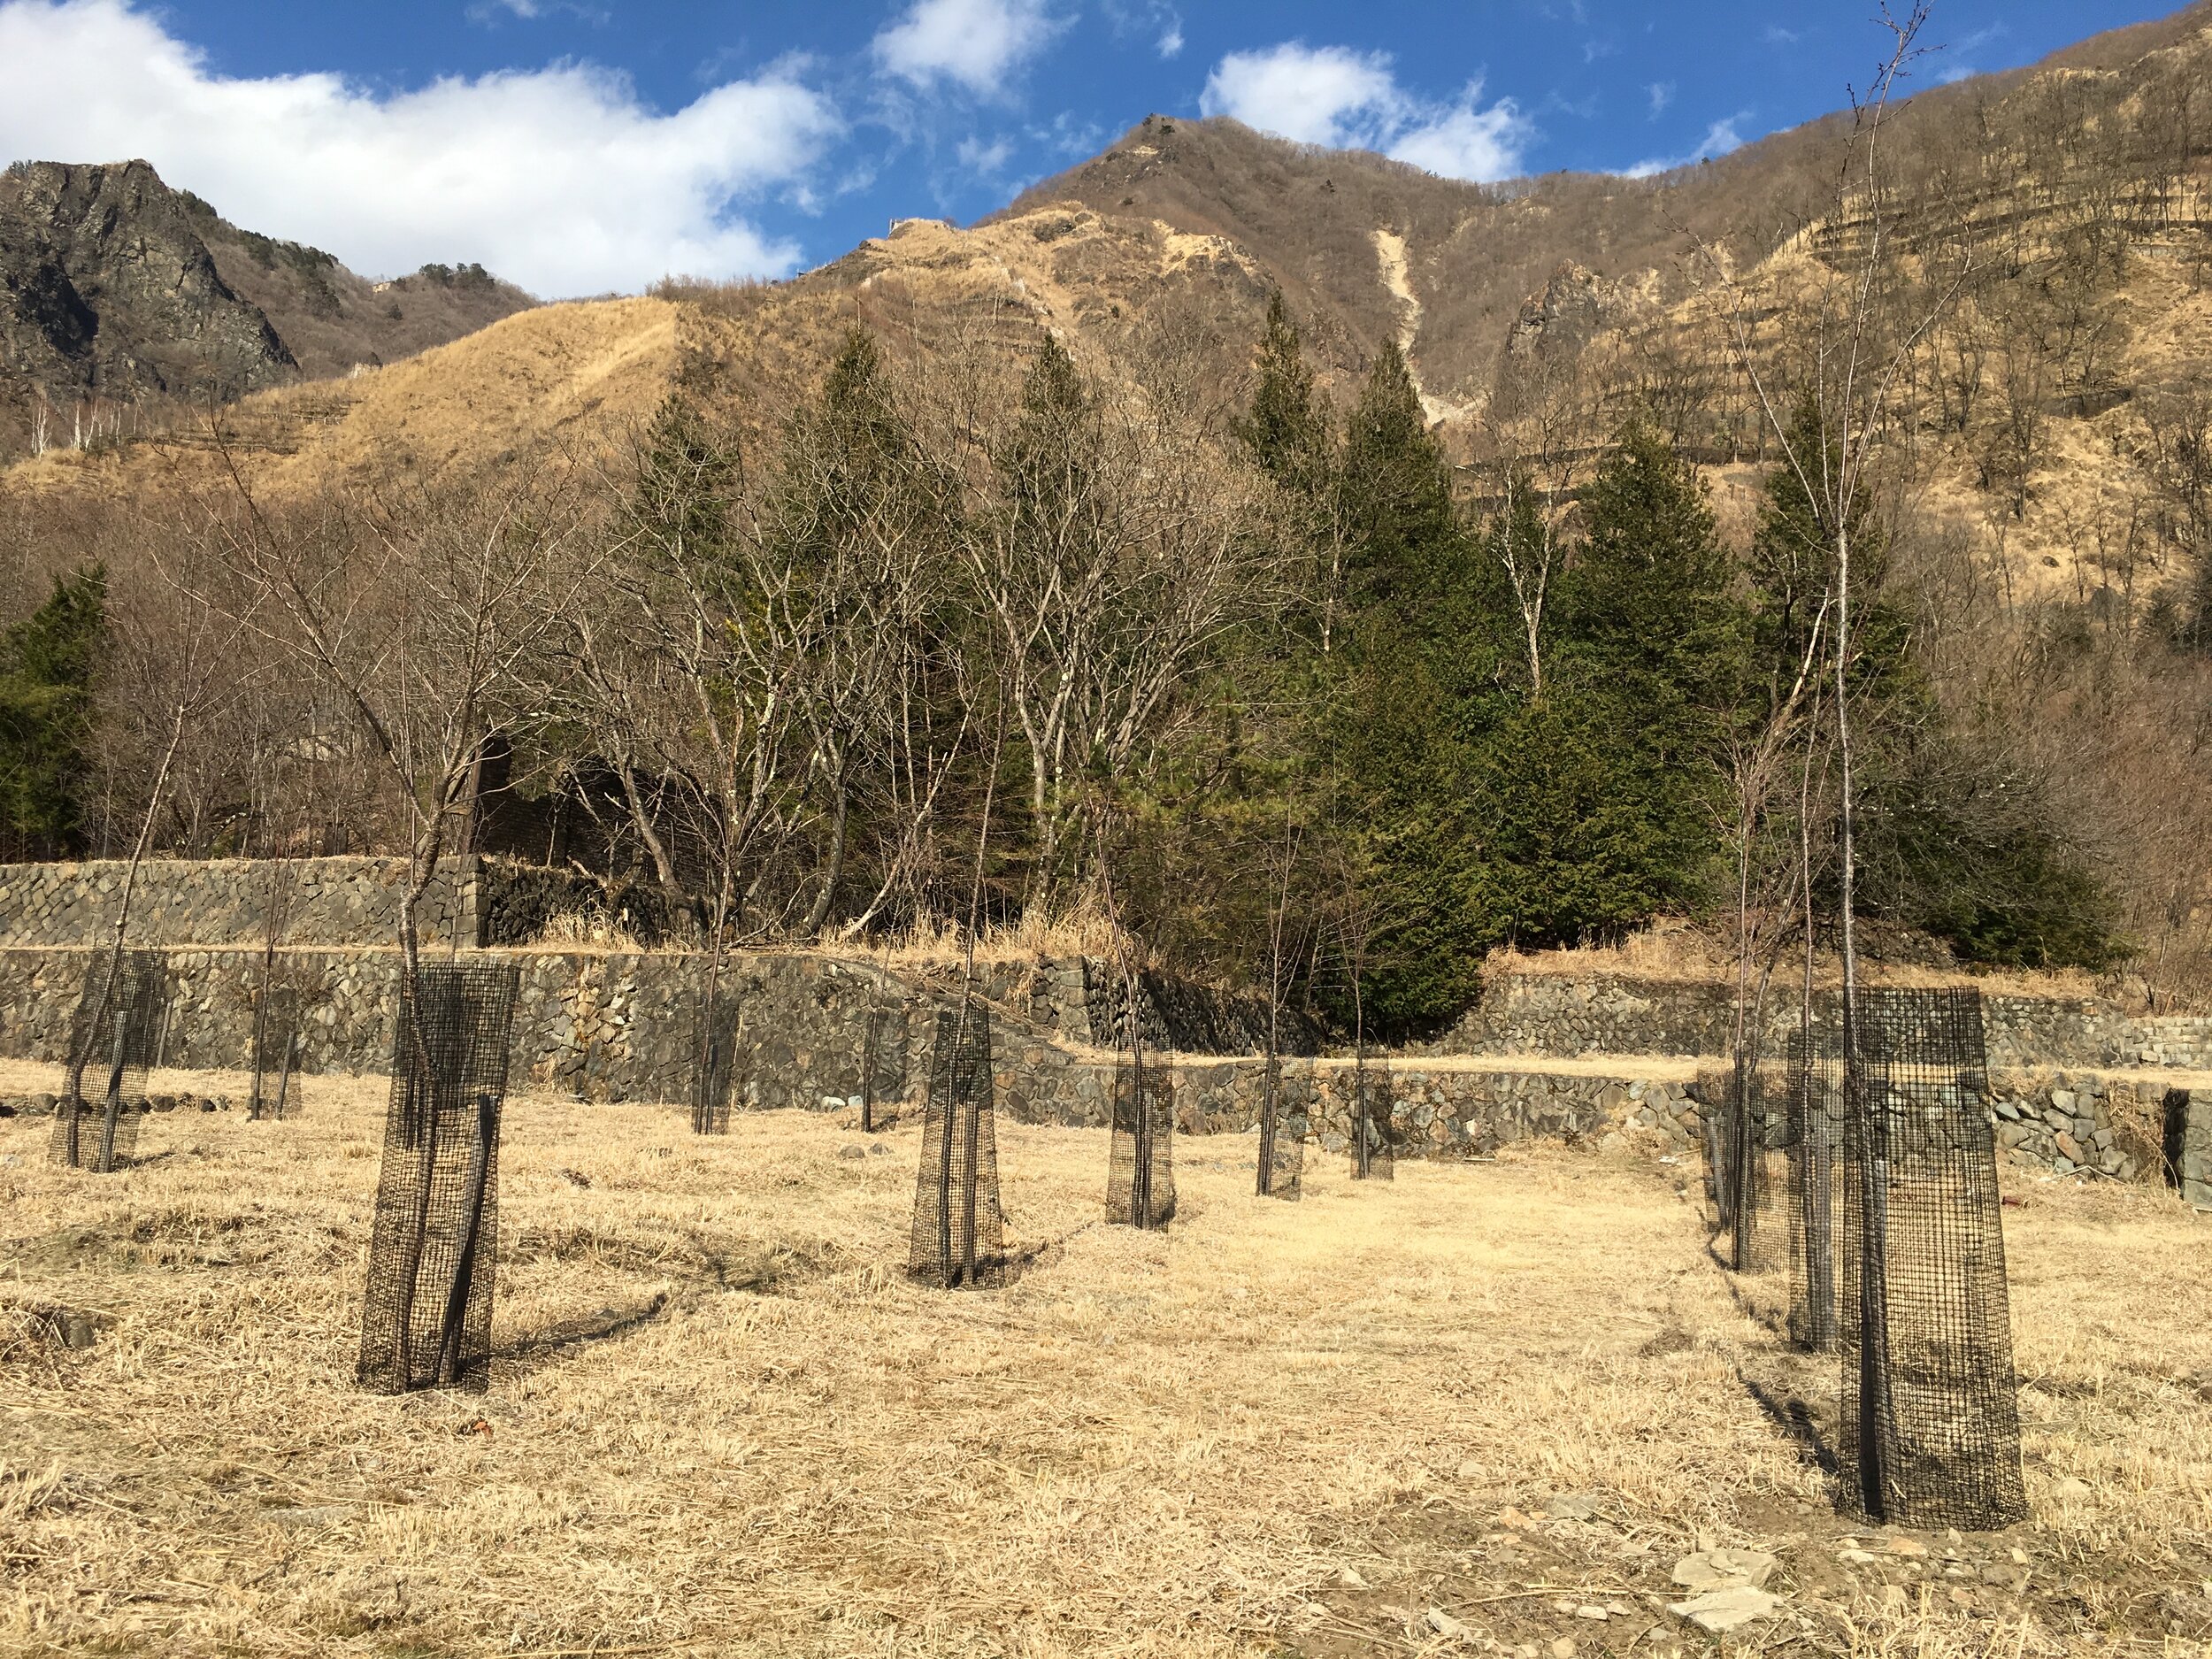  Photo 2: Today, communities work to restore the areas surrounding the now-closed Ashio copper mine, including reforestation of the mountains. (Credit: Takeshi Ito) 